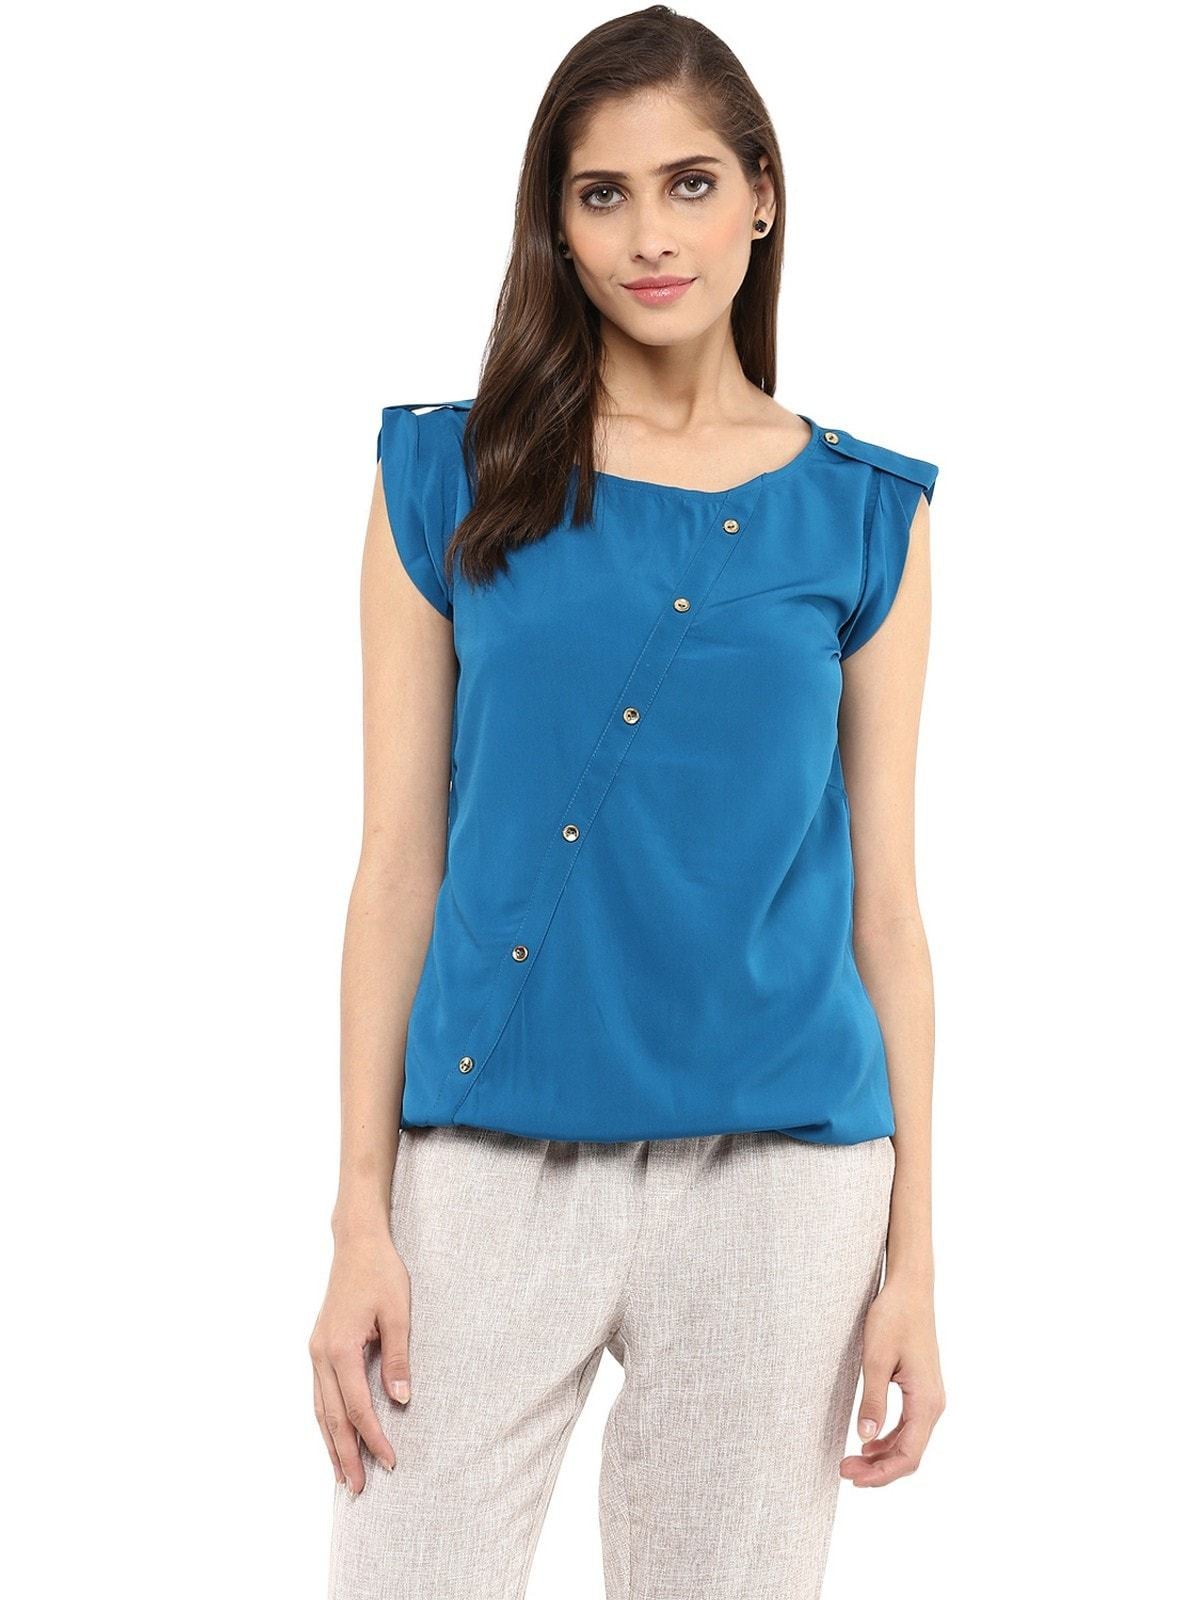 Women's Blue Top With Fake Shoulder-Tab - Pannkh